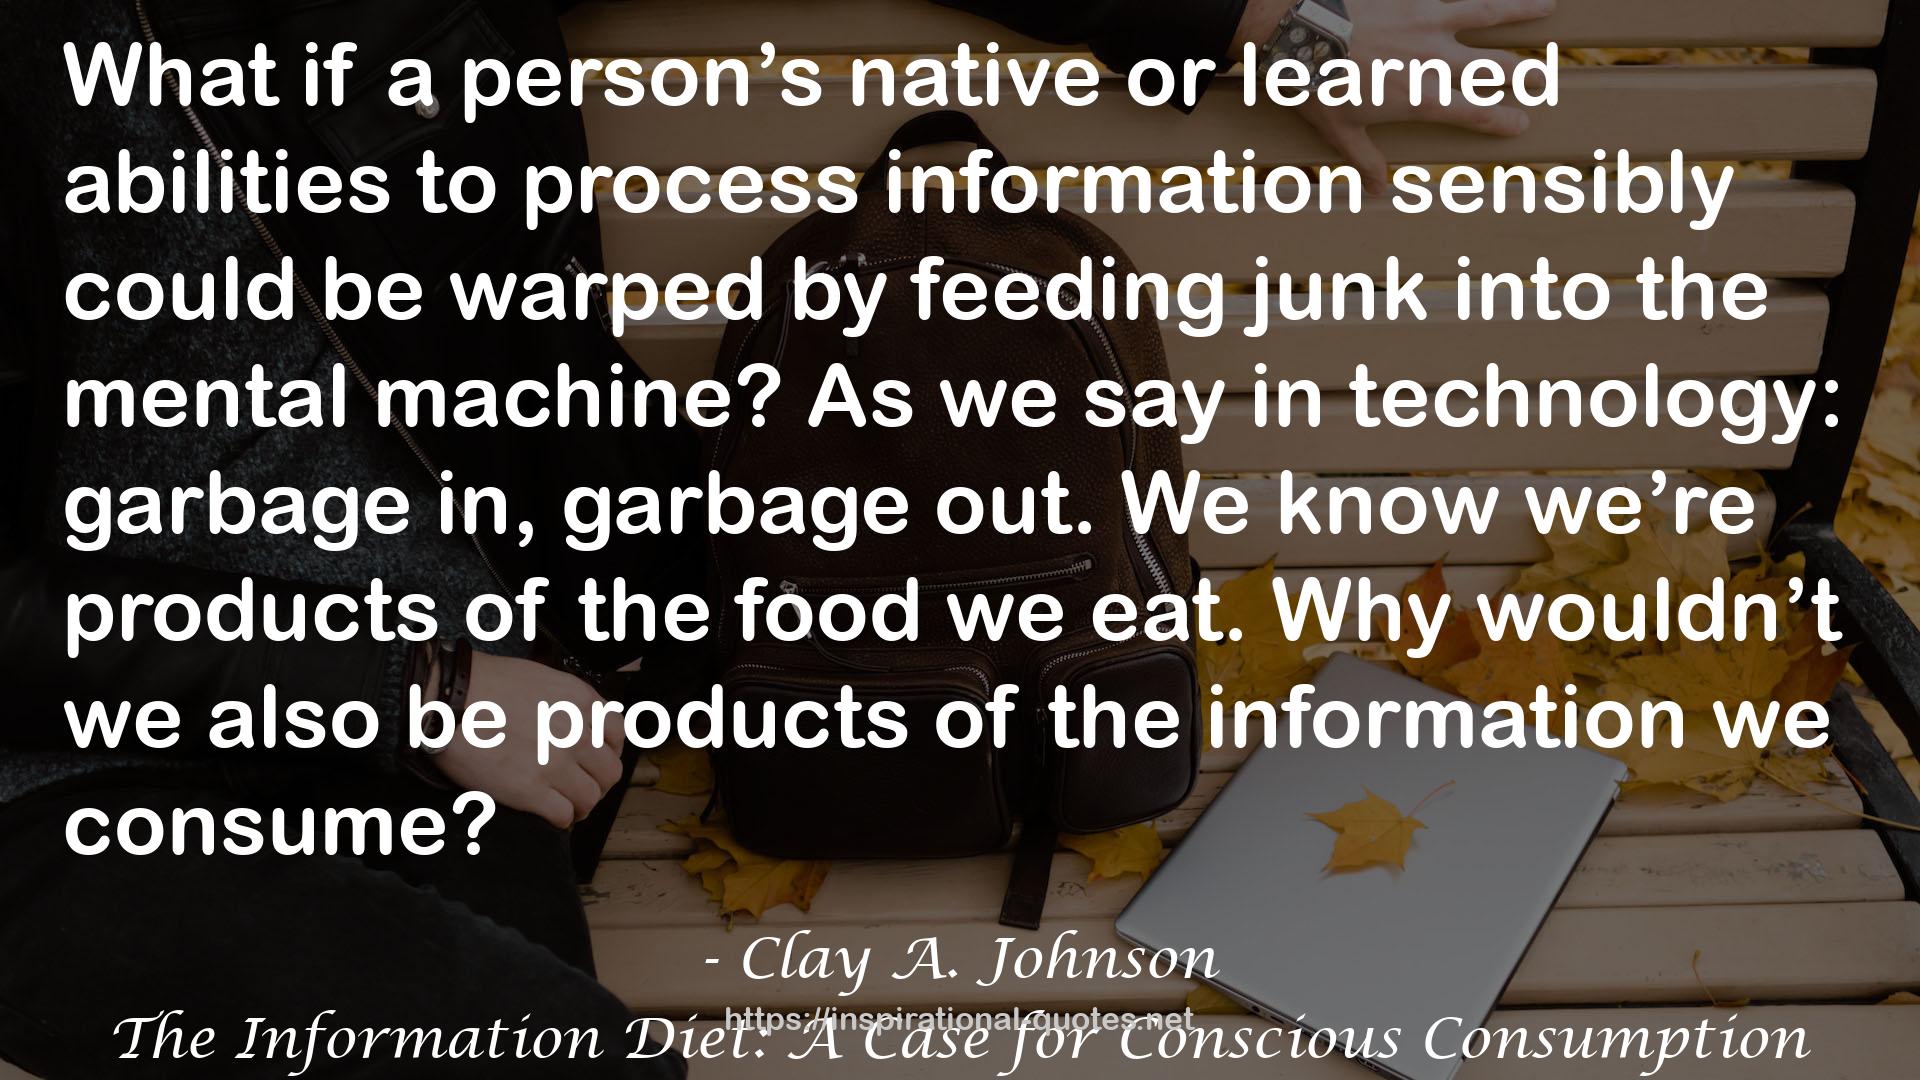 The Information Diet: A Case for Conscious Consumption QUOTES